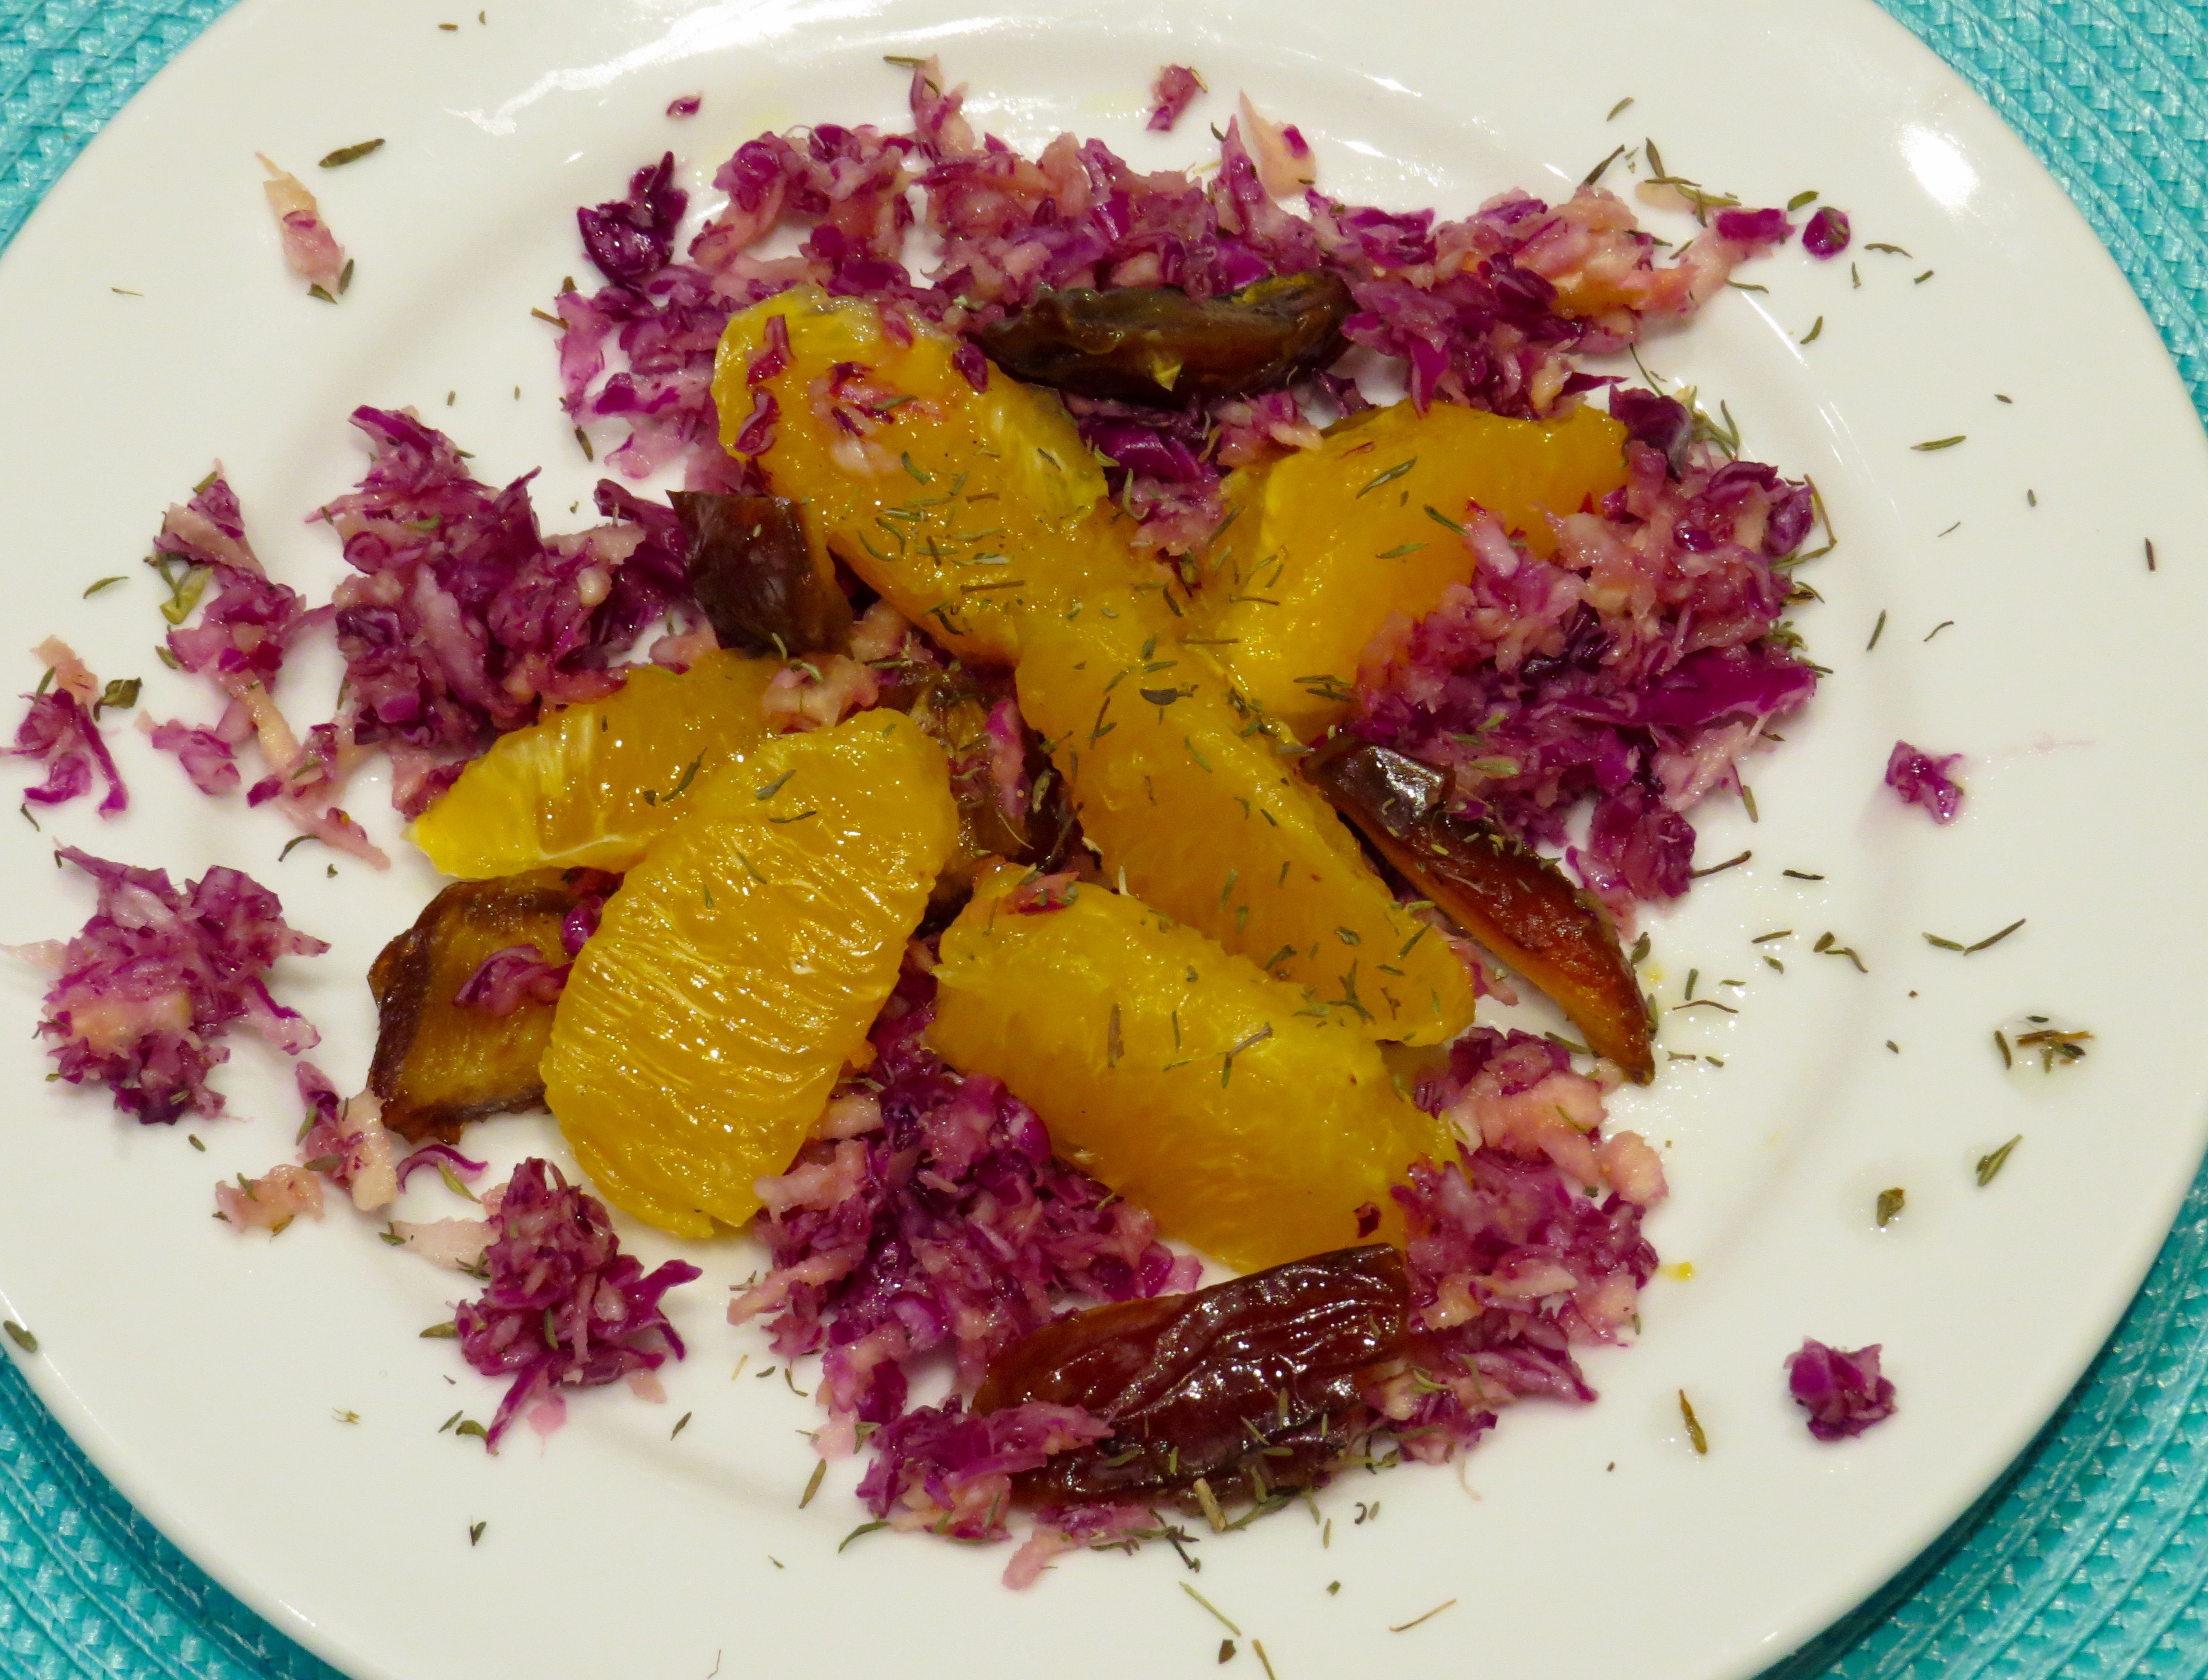 Red Cabbage, Parsnip, Orange and Dates Salad has Zing - that's the perfect word. The orange's juice provides the dressing. 